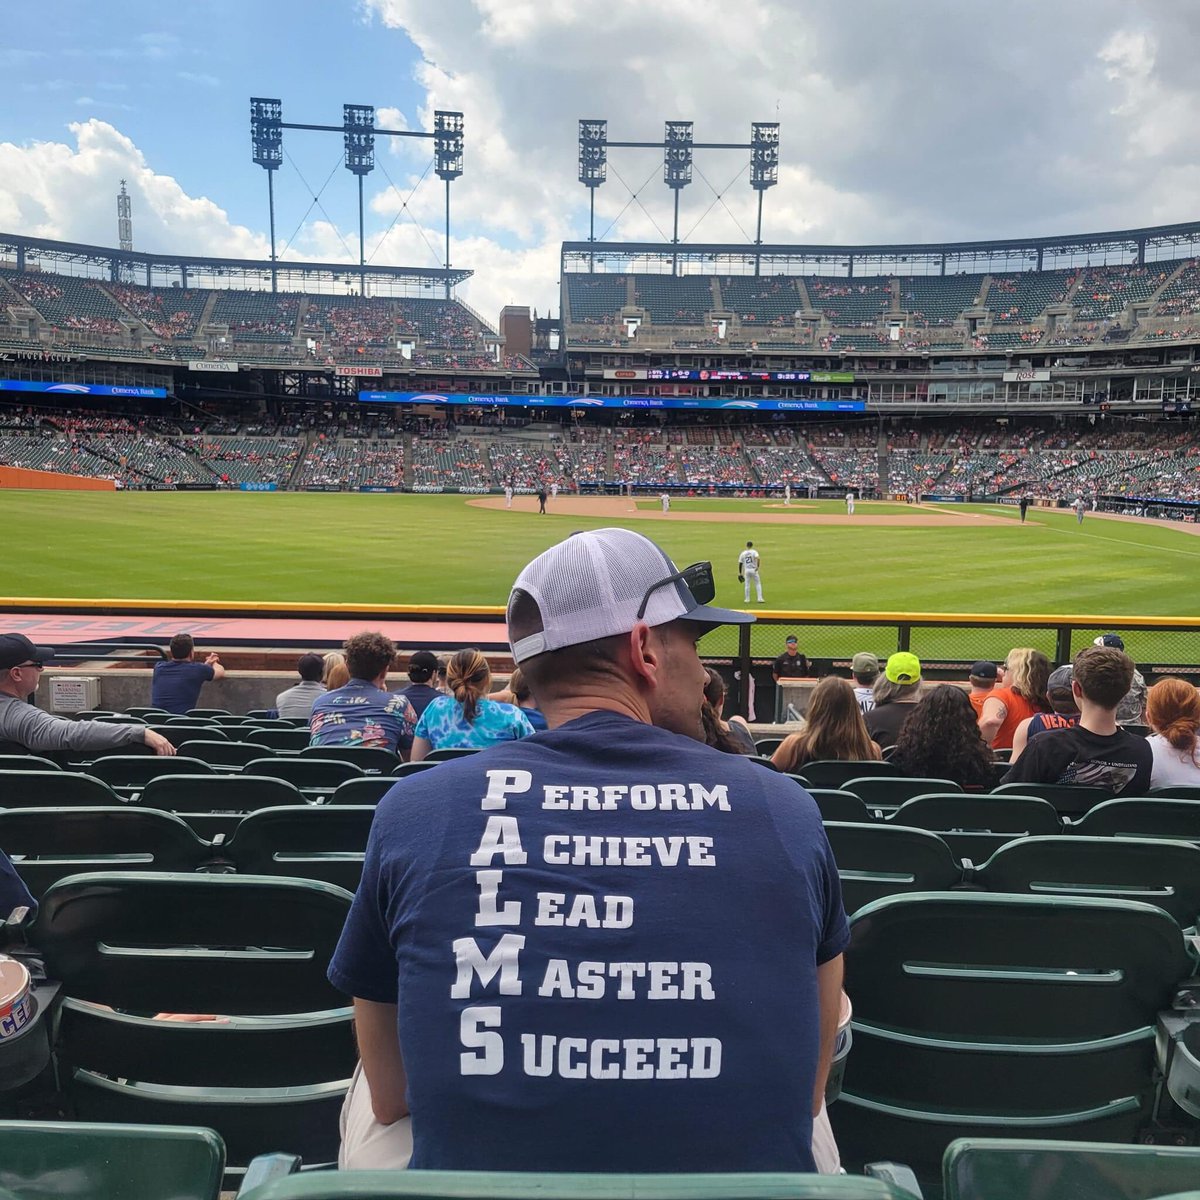 As a Principal, some days are good, and some are GREAT! What’s your mindset??? Today, seeing our #PalmsRocks kids and parents enjoy a STEAM Day and Detroit @tigers game/win was amazing. PROMOTE THE POSITIVE, people!!! #MEMSPA #MEMSPAchat